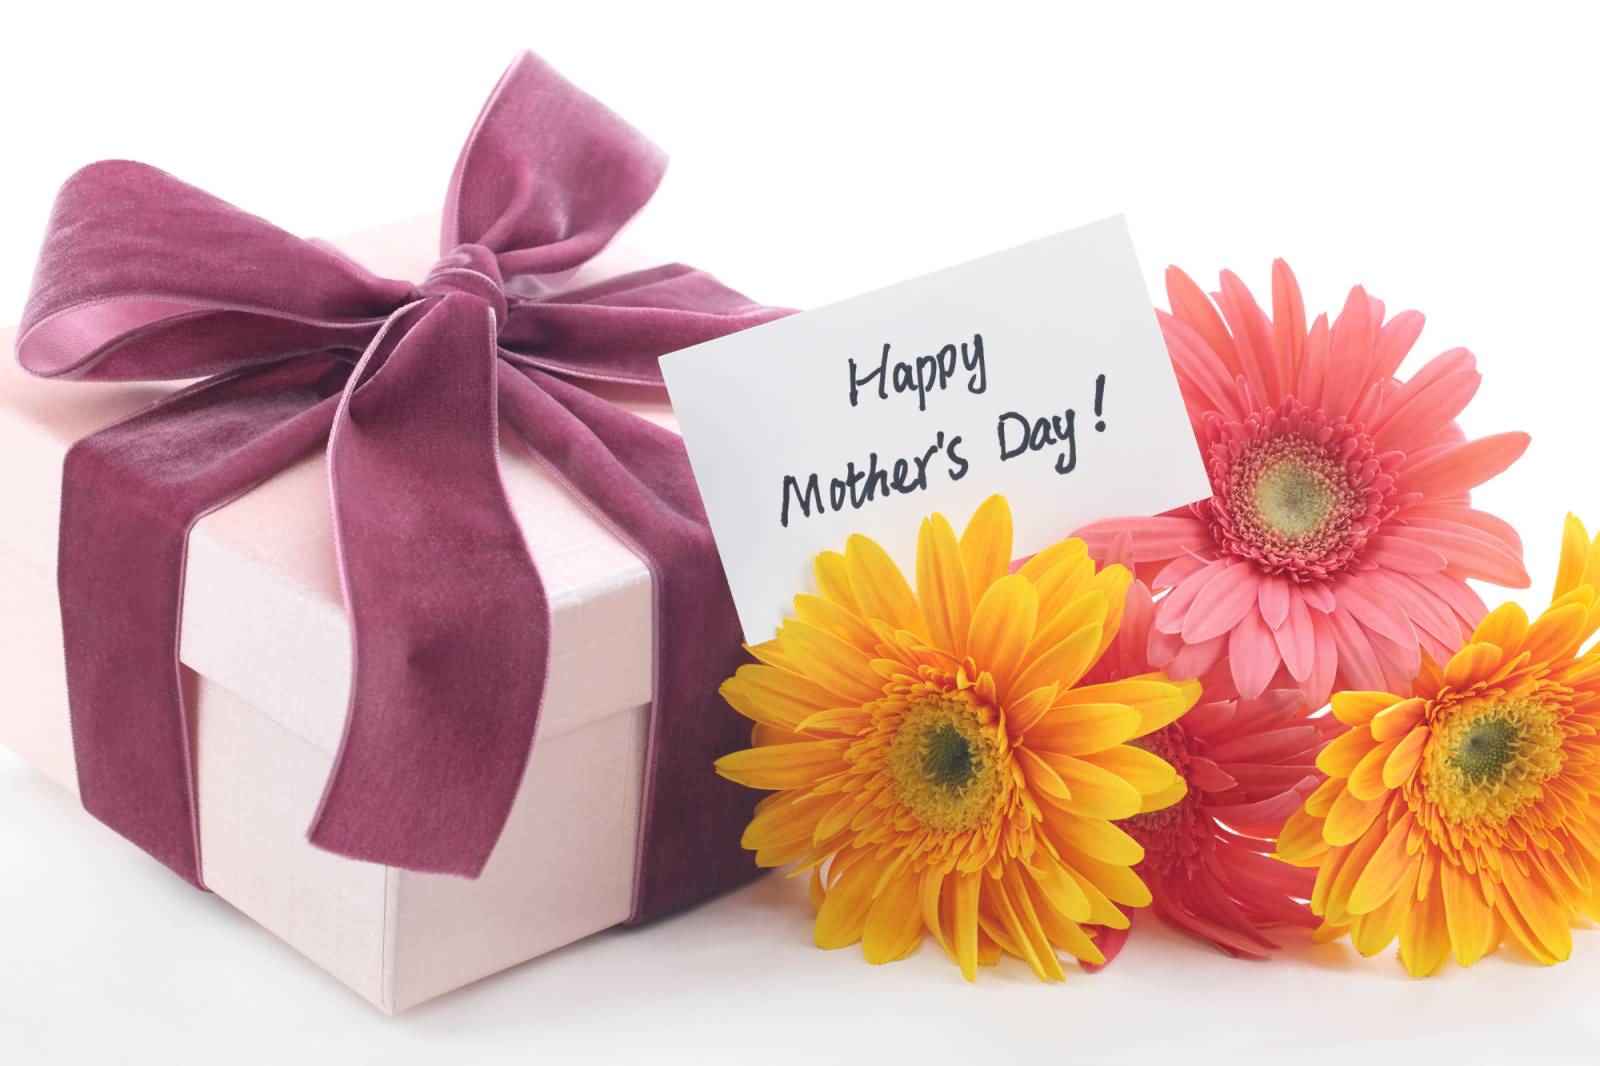 Happy Mother’s Day Note With Gift Box And Flowers